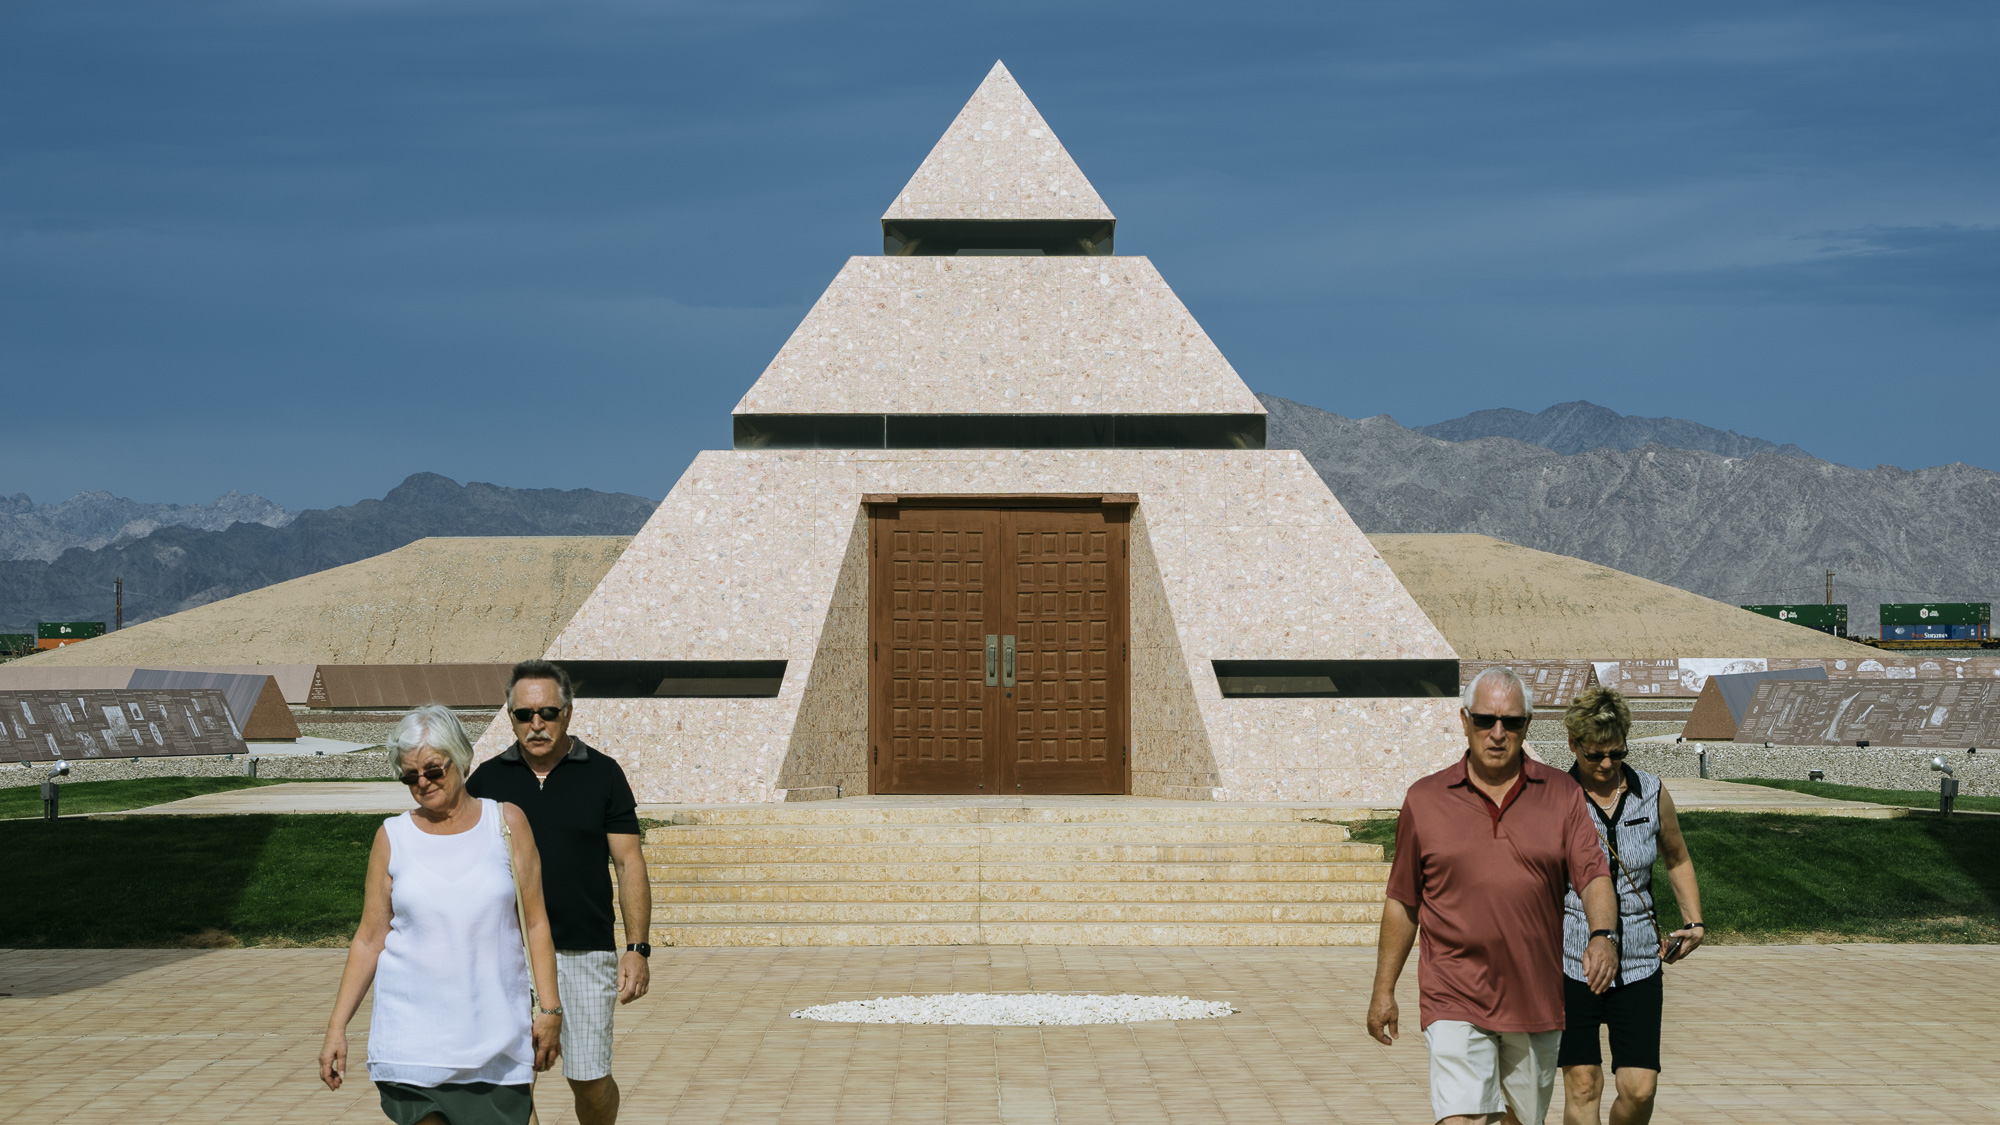  IMAGE CAPTION:  Canadian tourists at ‘The Official Center of the World’ a roadside attraction in Felicity, California, less than 5 miles away from the Andrade Port of Entry. 